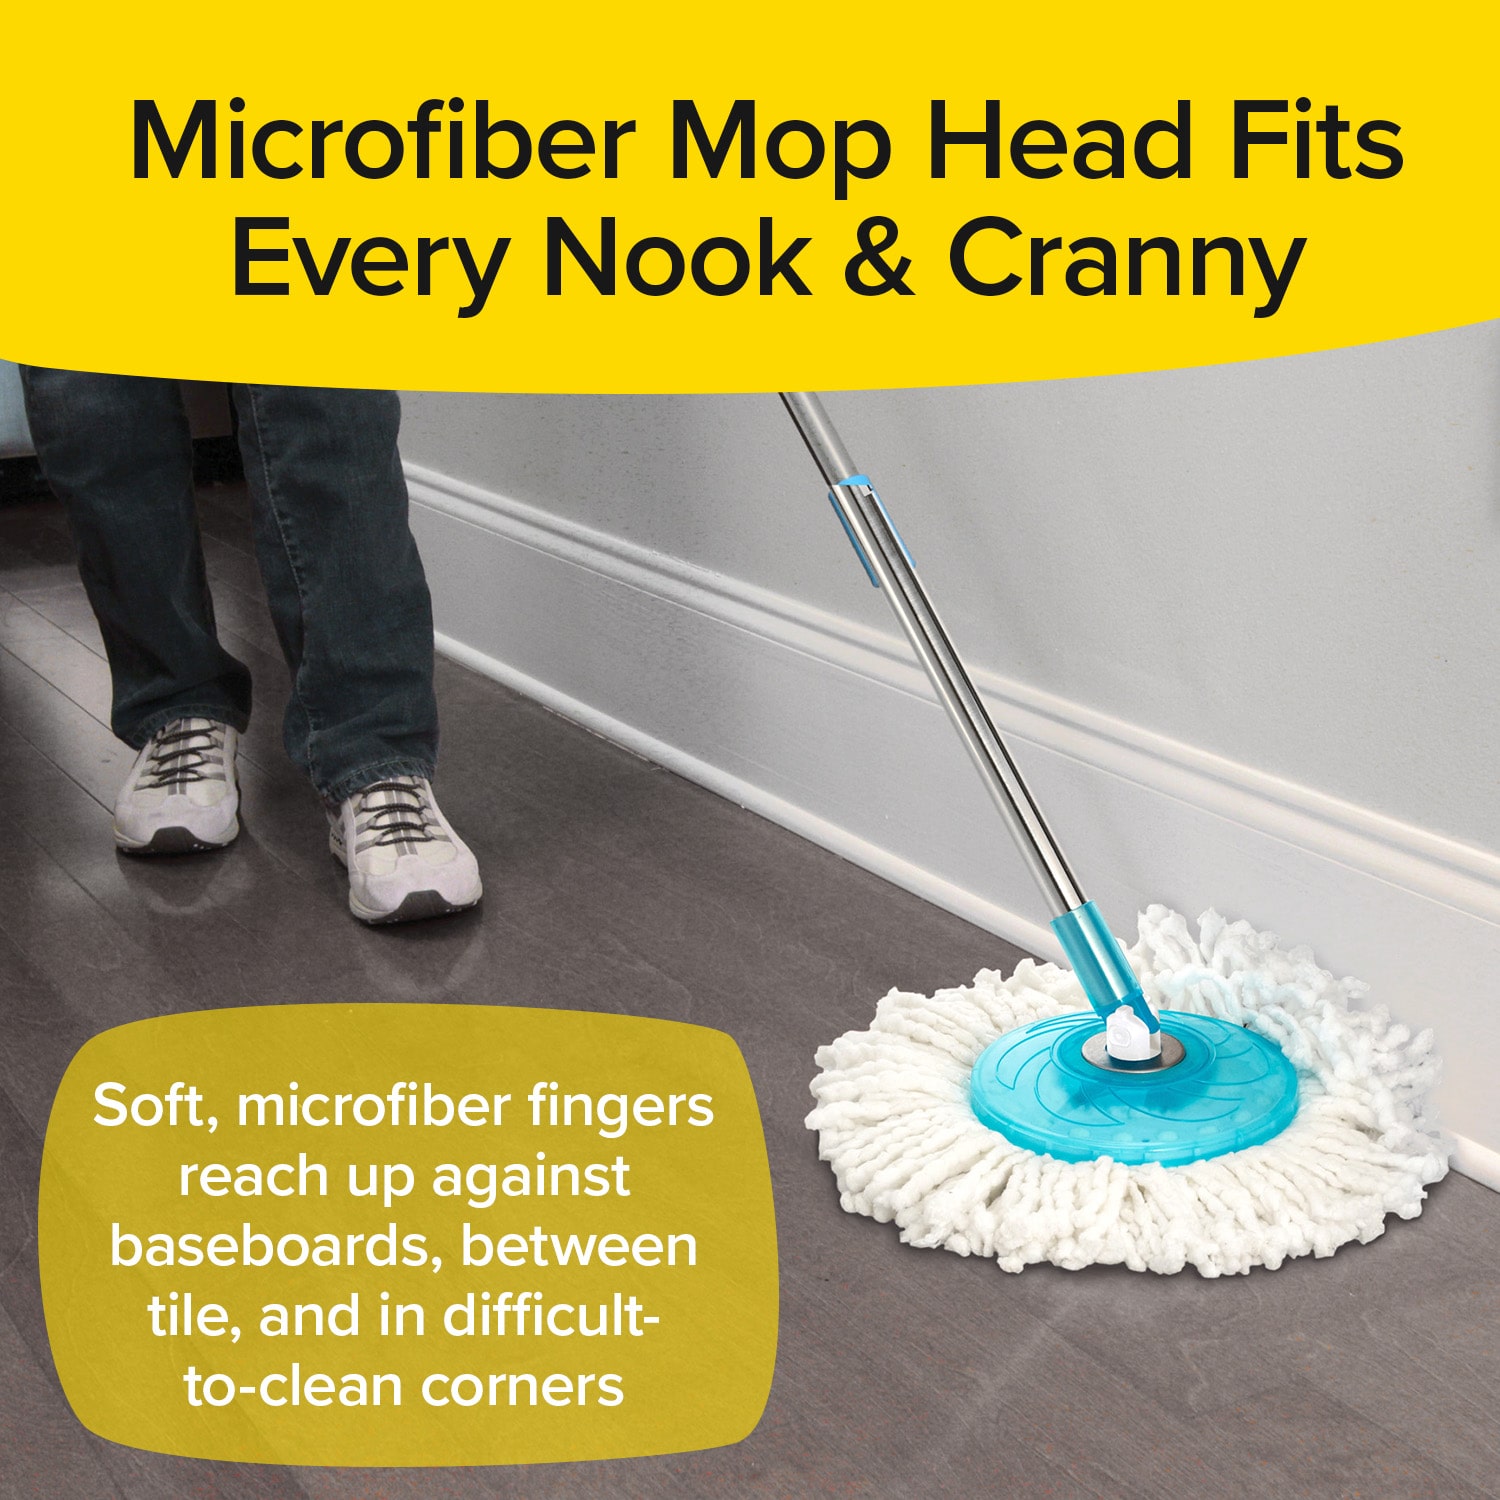 Hurricane Spin Mop As Seen On TV Mop & Bucket Cleaning System by BulbHead - image 3 of 9